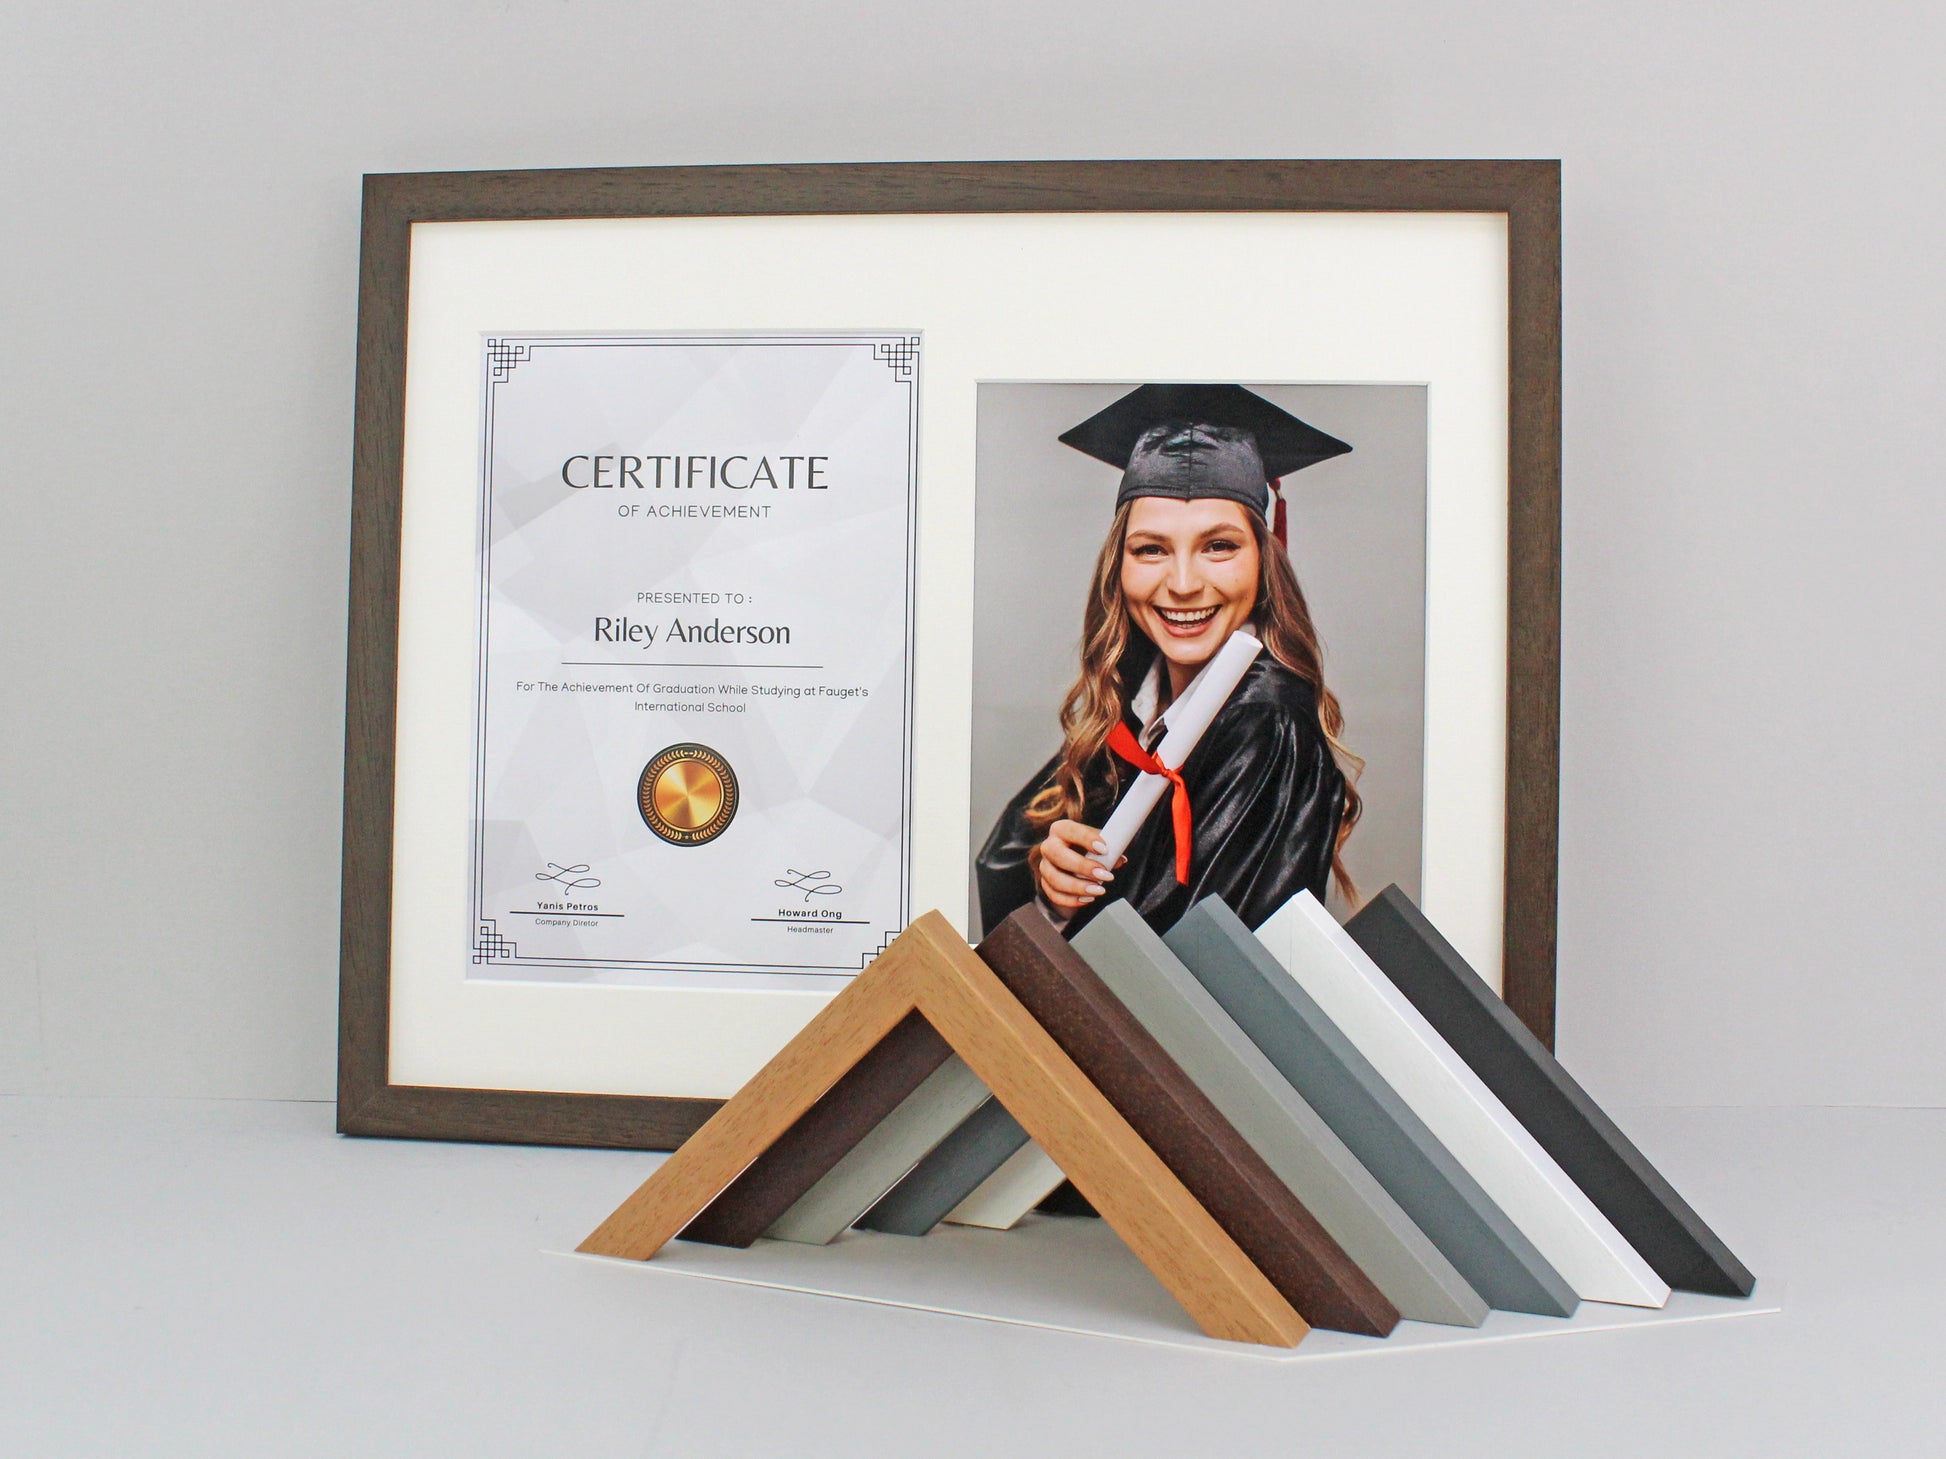 Certificate, Graduation, Diploma Frame with Photo. Suits an A4 Sized Certificate/image and a 10x8" Photo. - PhotoFramesandMore - Wooden Picture Frames